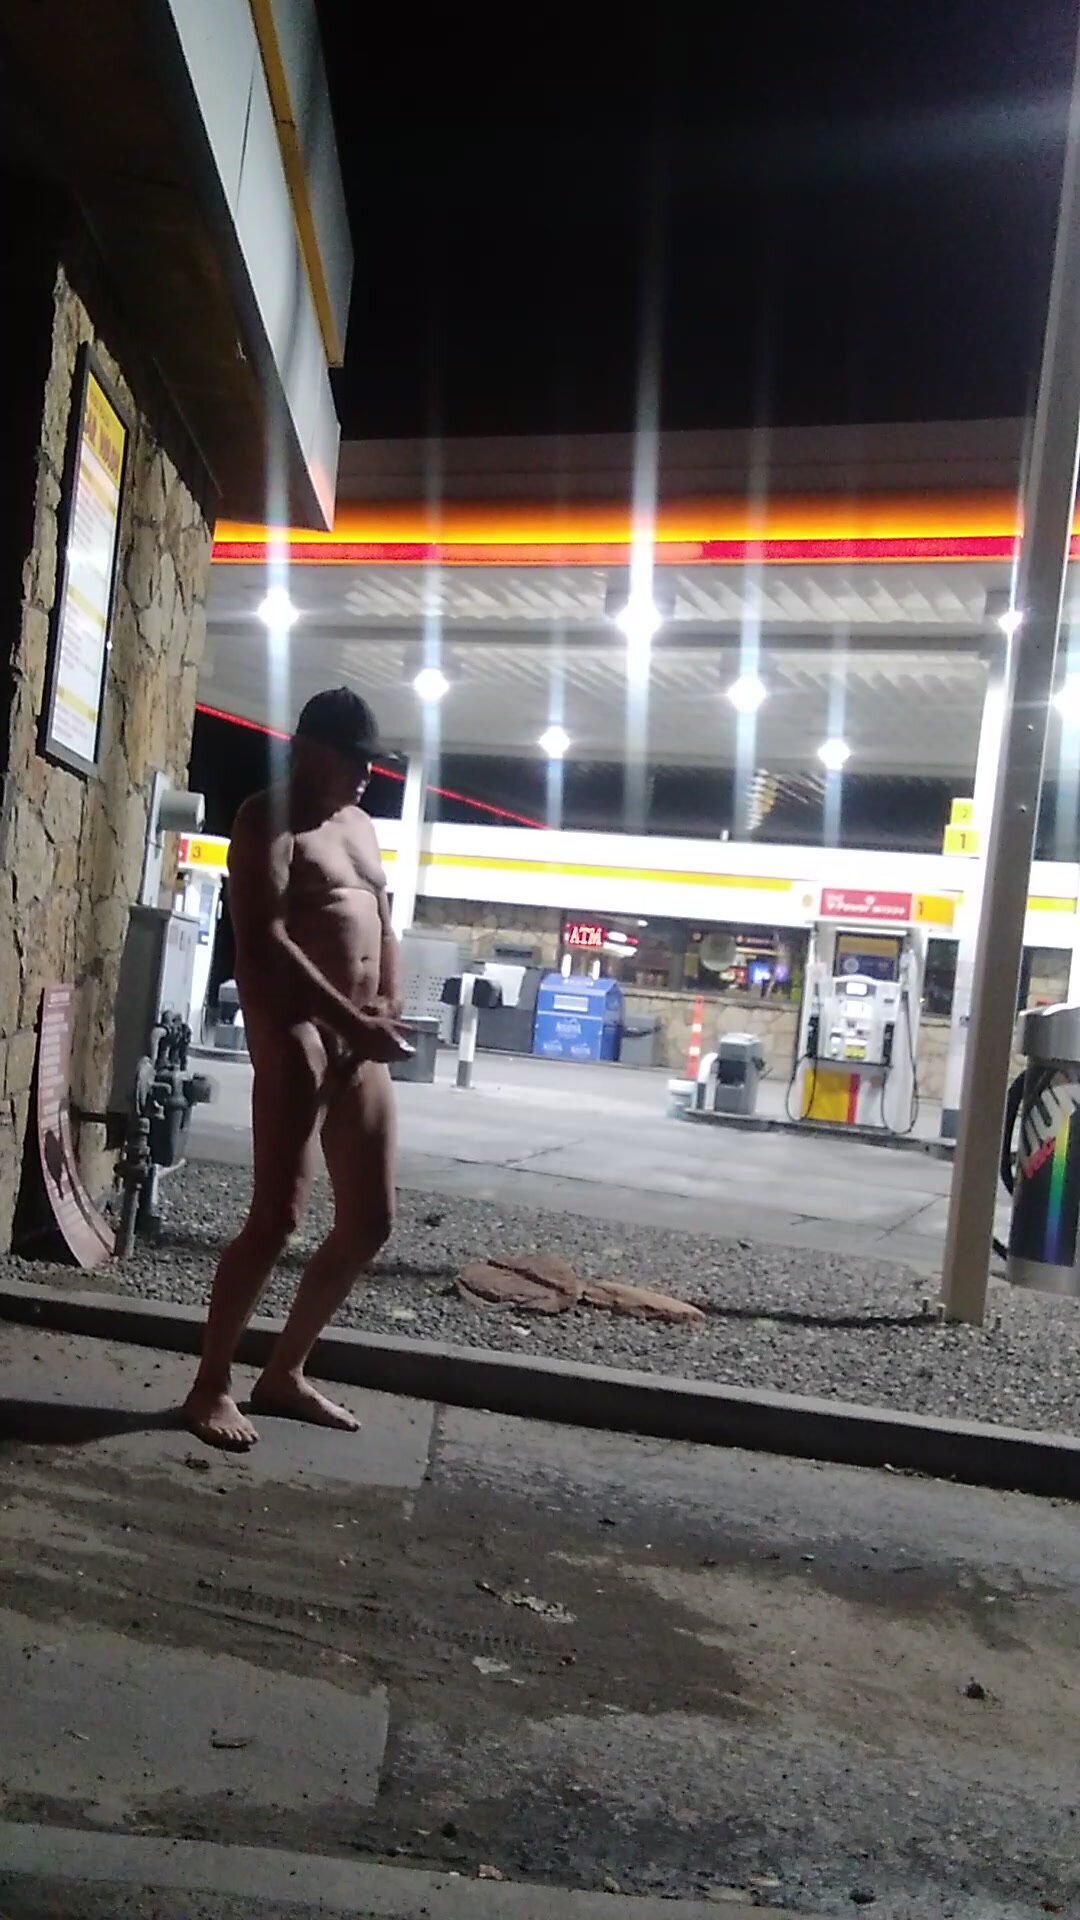 Perv At Gas Station